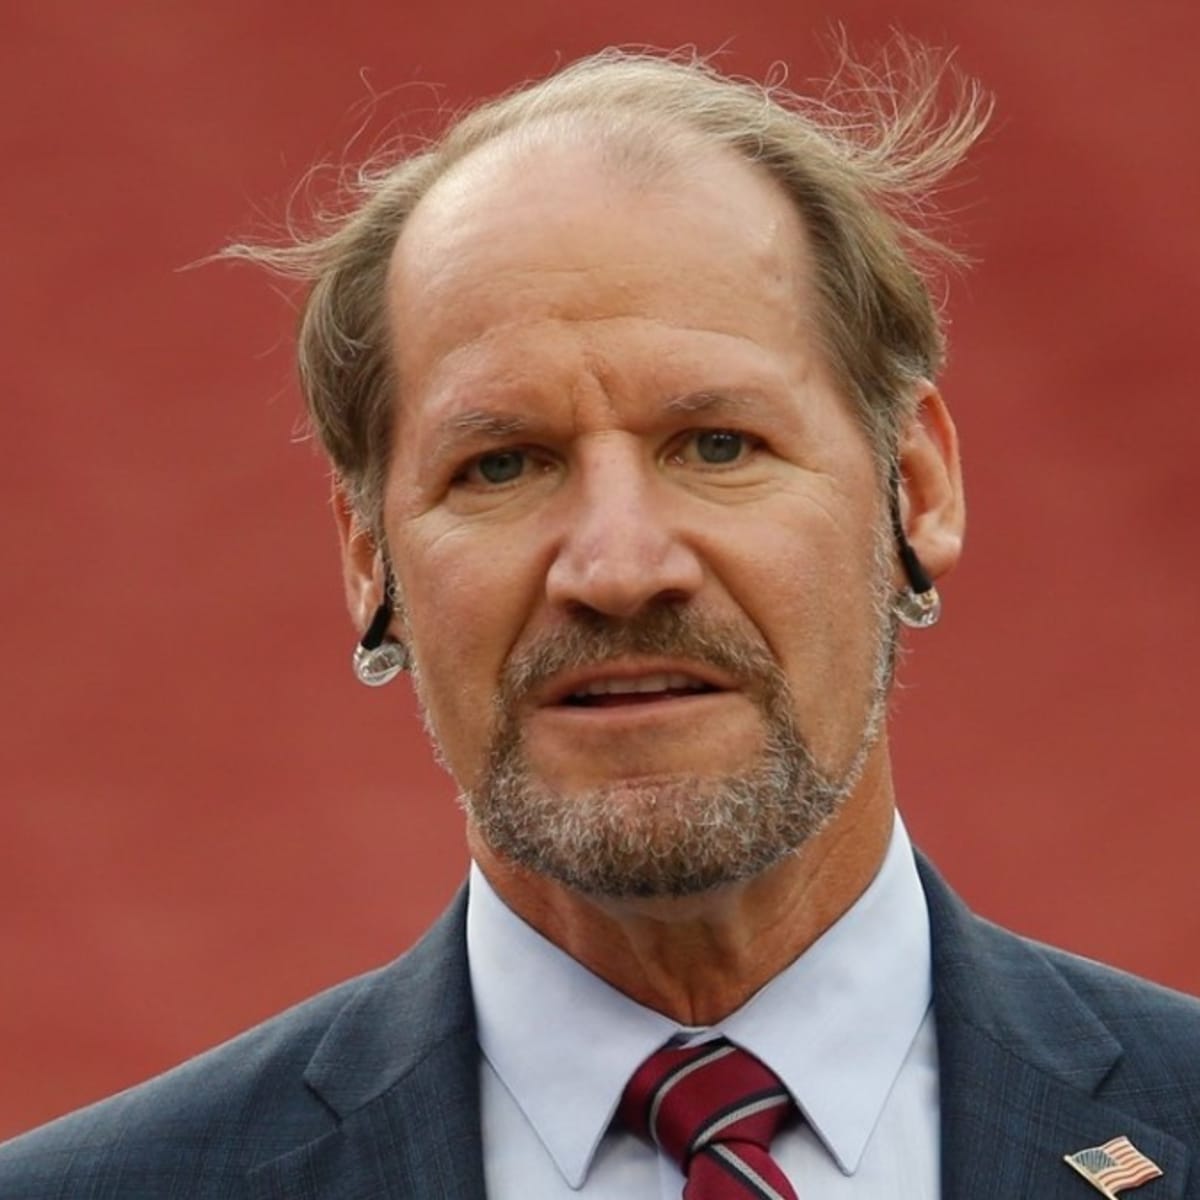 CBS Sports NFL analyst Bill Cowher gives his perspective on the